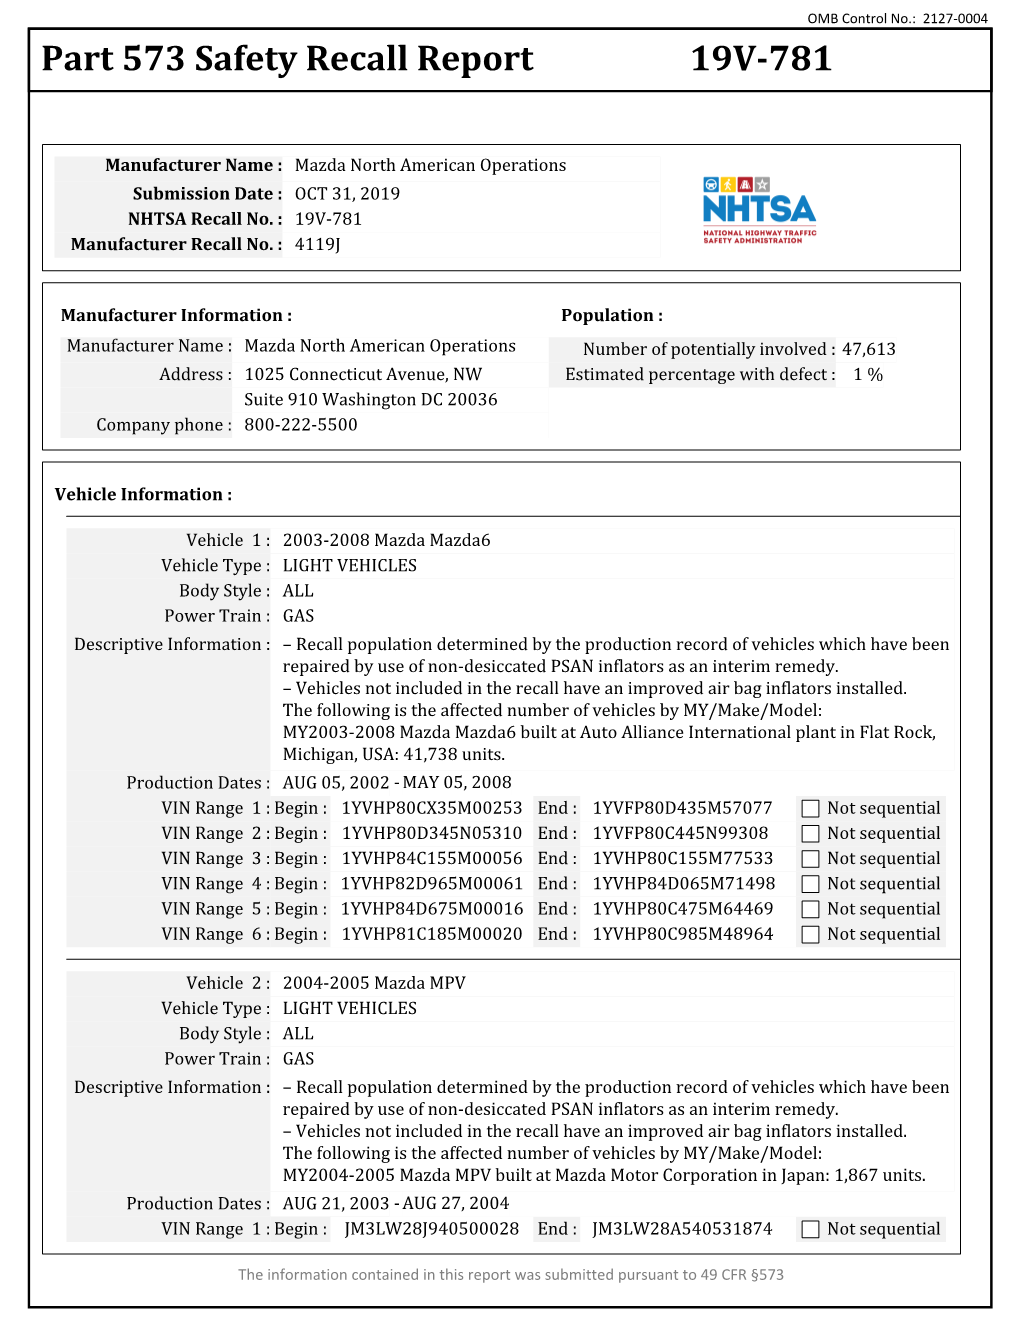 Part 573 Safety Recall Report 19V-781